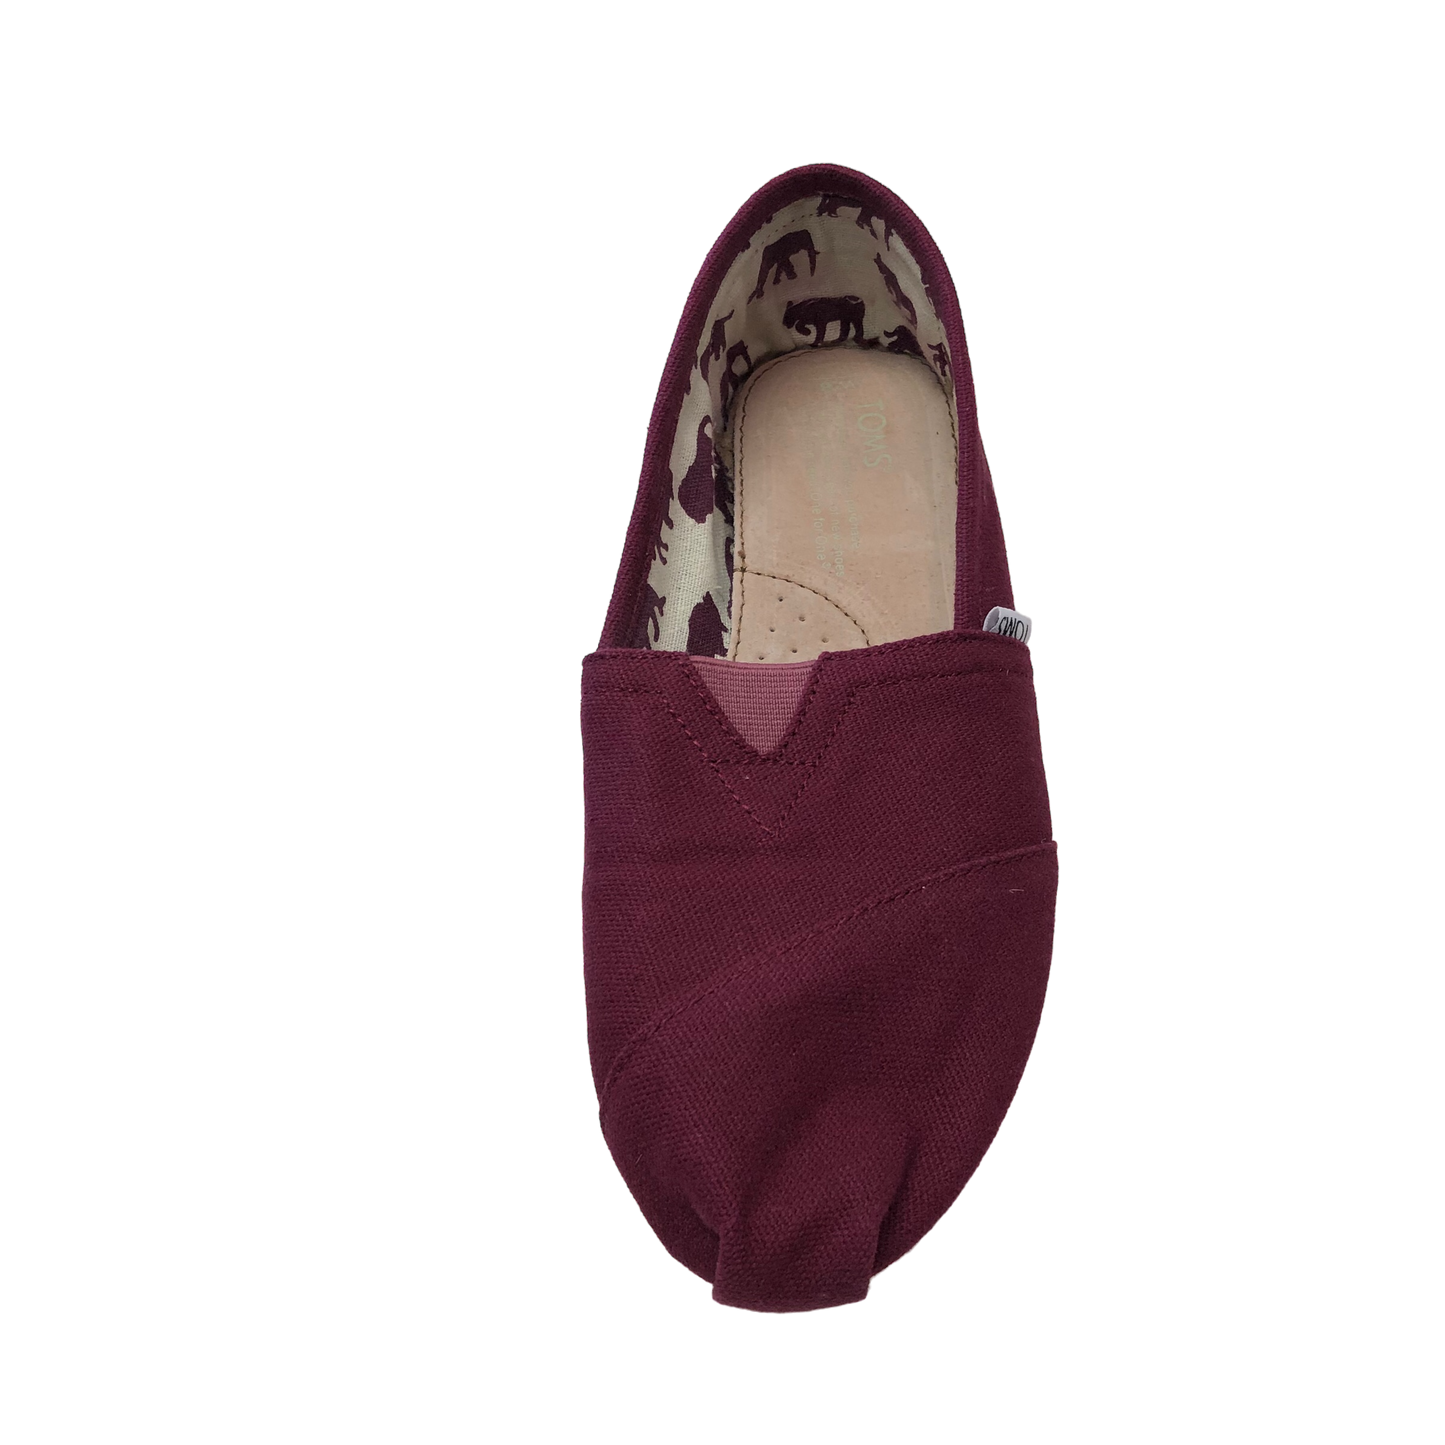 Red Shoes Flats Toms, Size 8